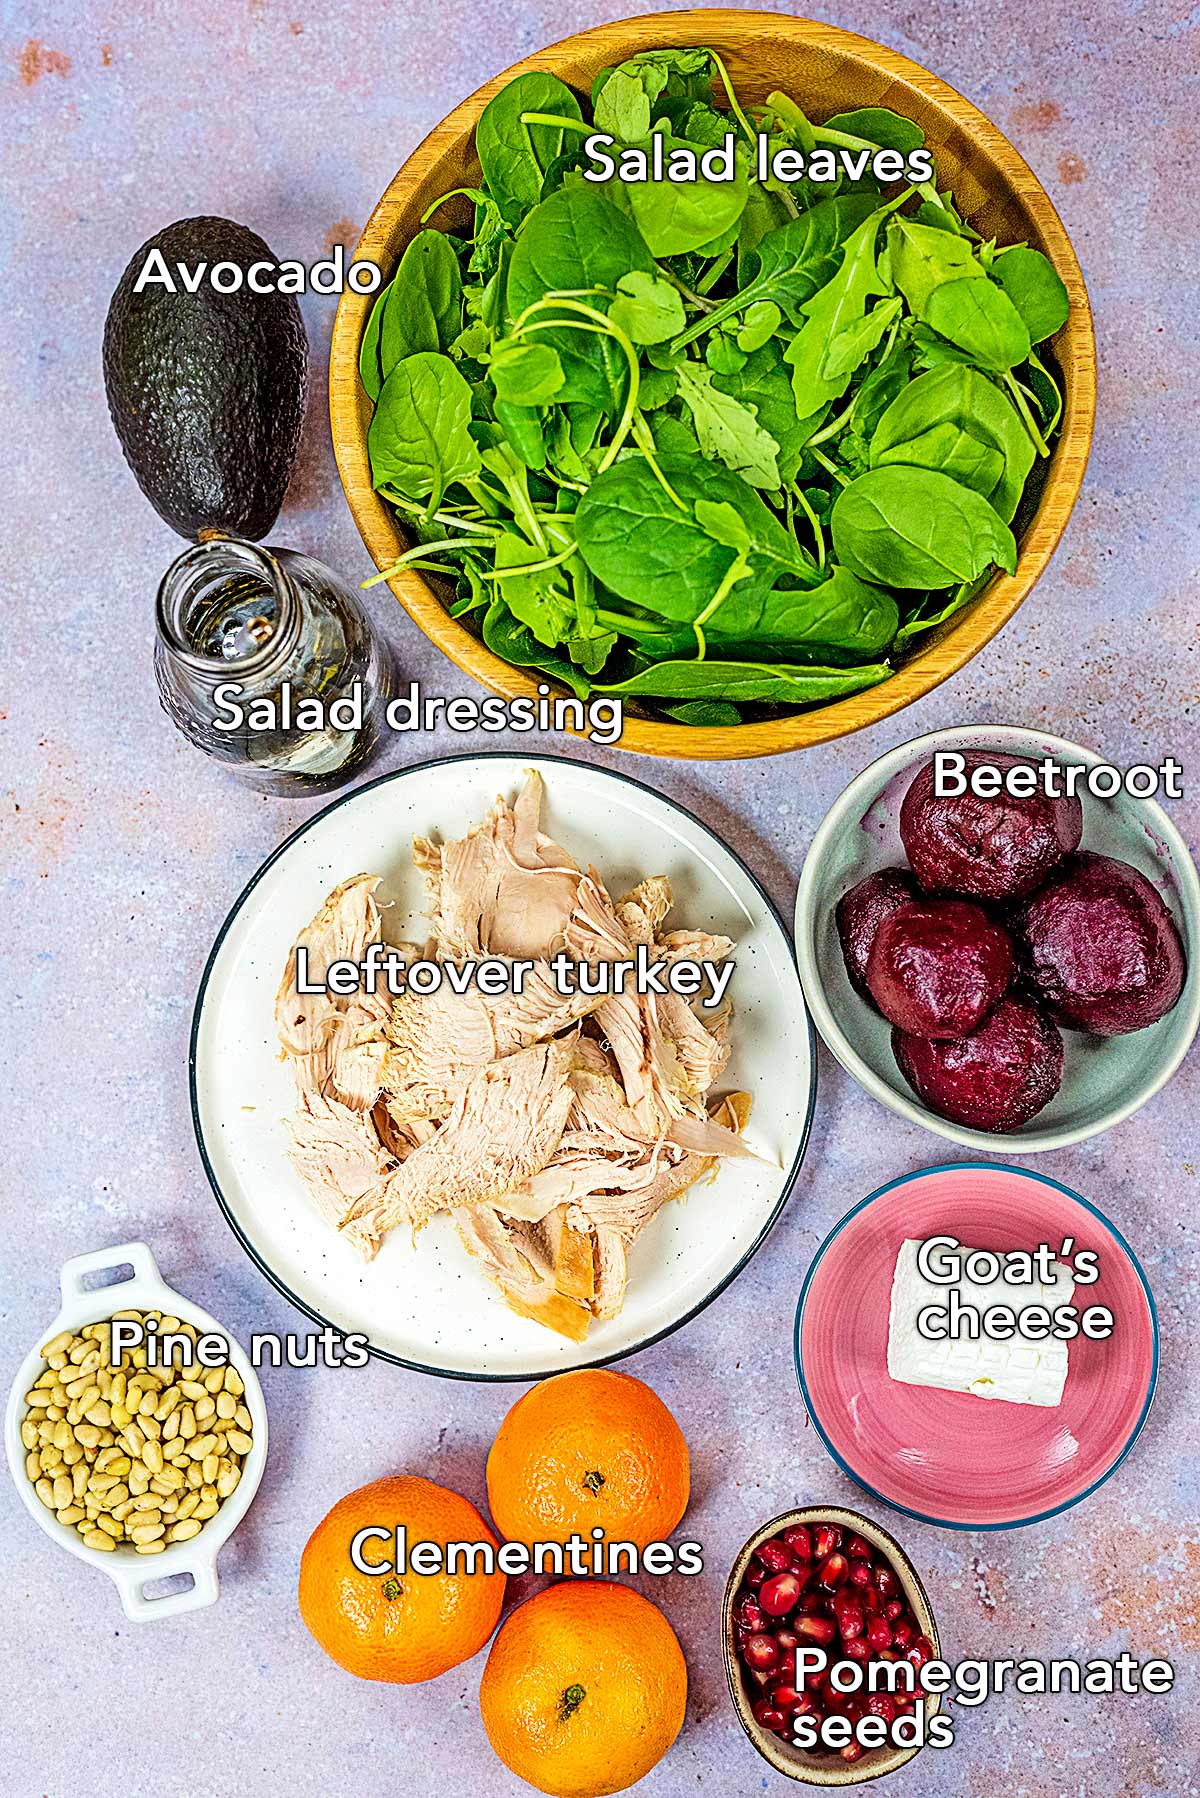 All the ingredients needed for this recipe laid out with text overlay labels.